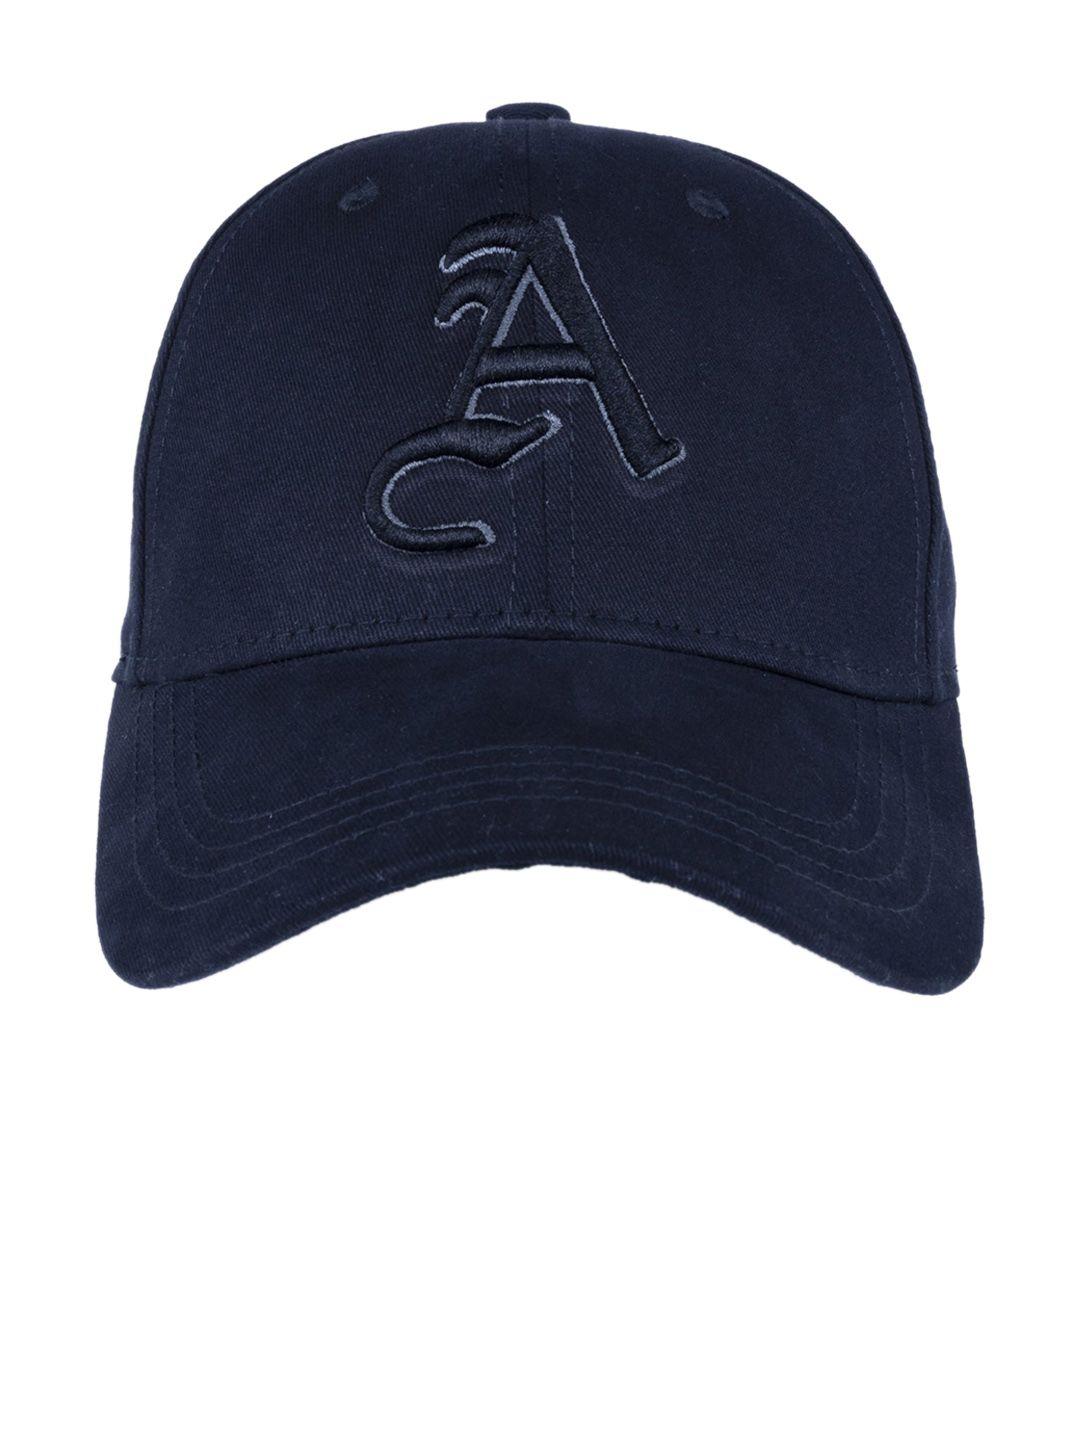 status quo men navy blue embroidered letter a baseball cap